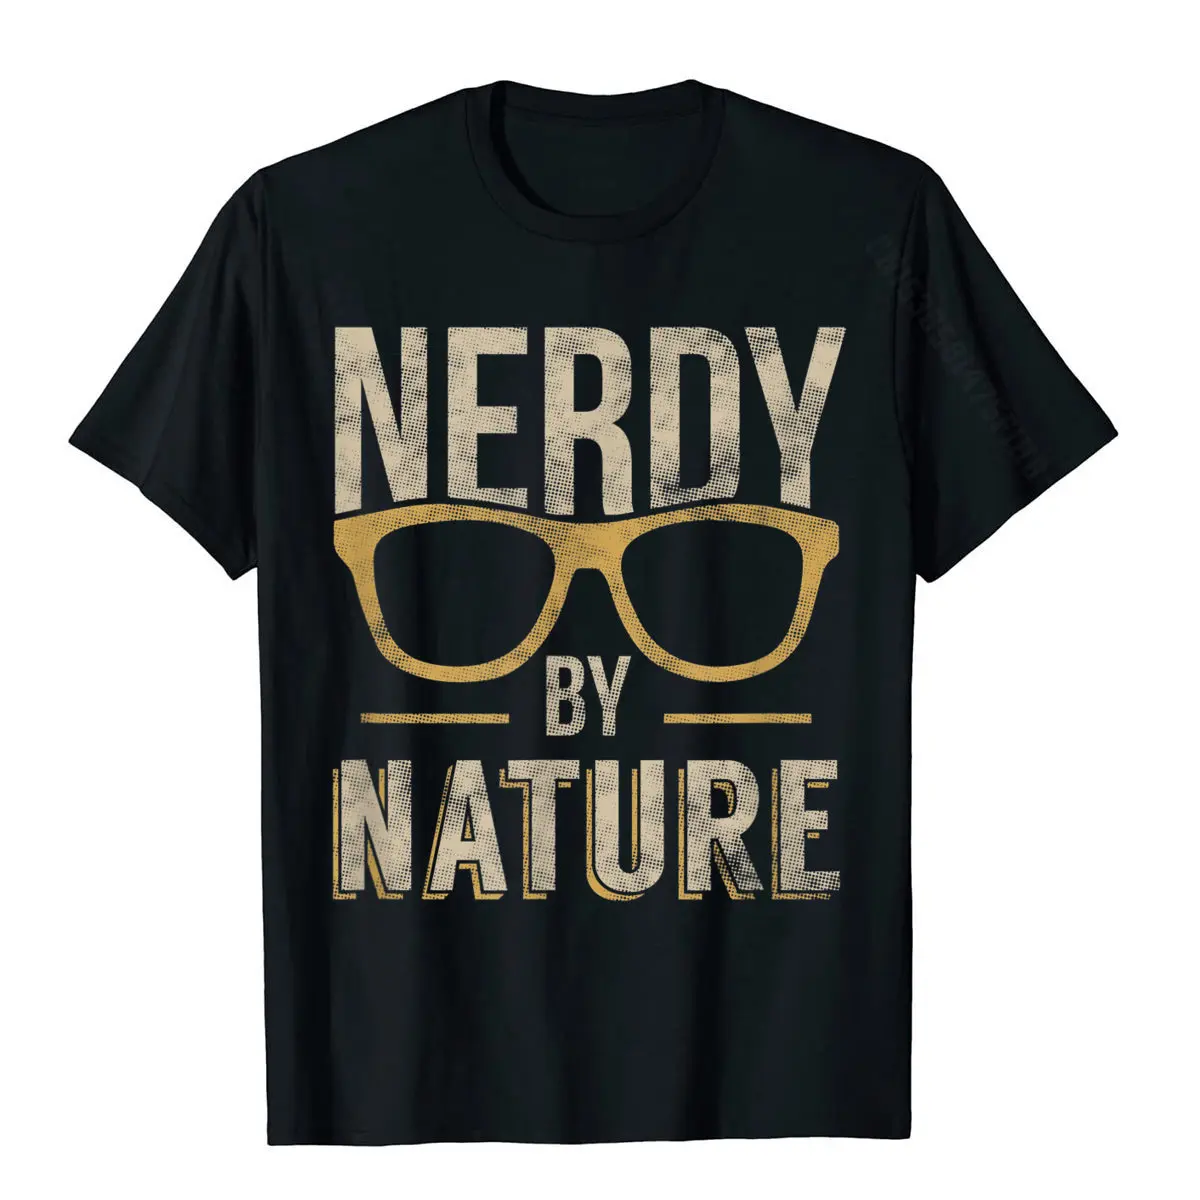 Nerd T-Shirt Gift Nerdy By Nature Eyeglasses Frames Funny Cotton Tops Tees Summer Latest Normal T Shirt